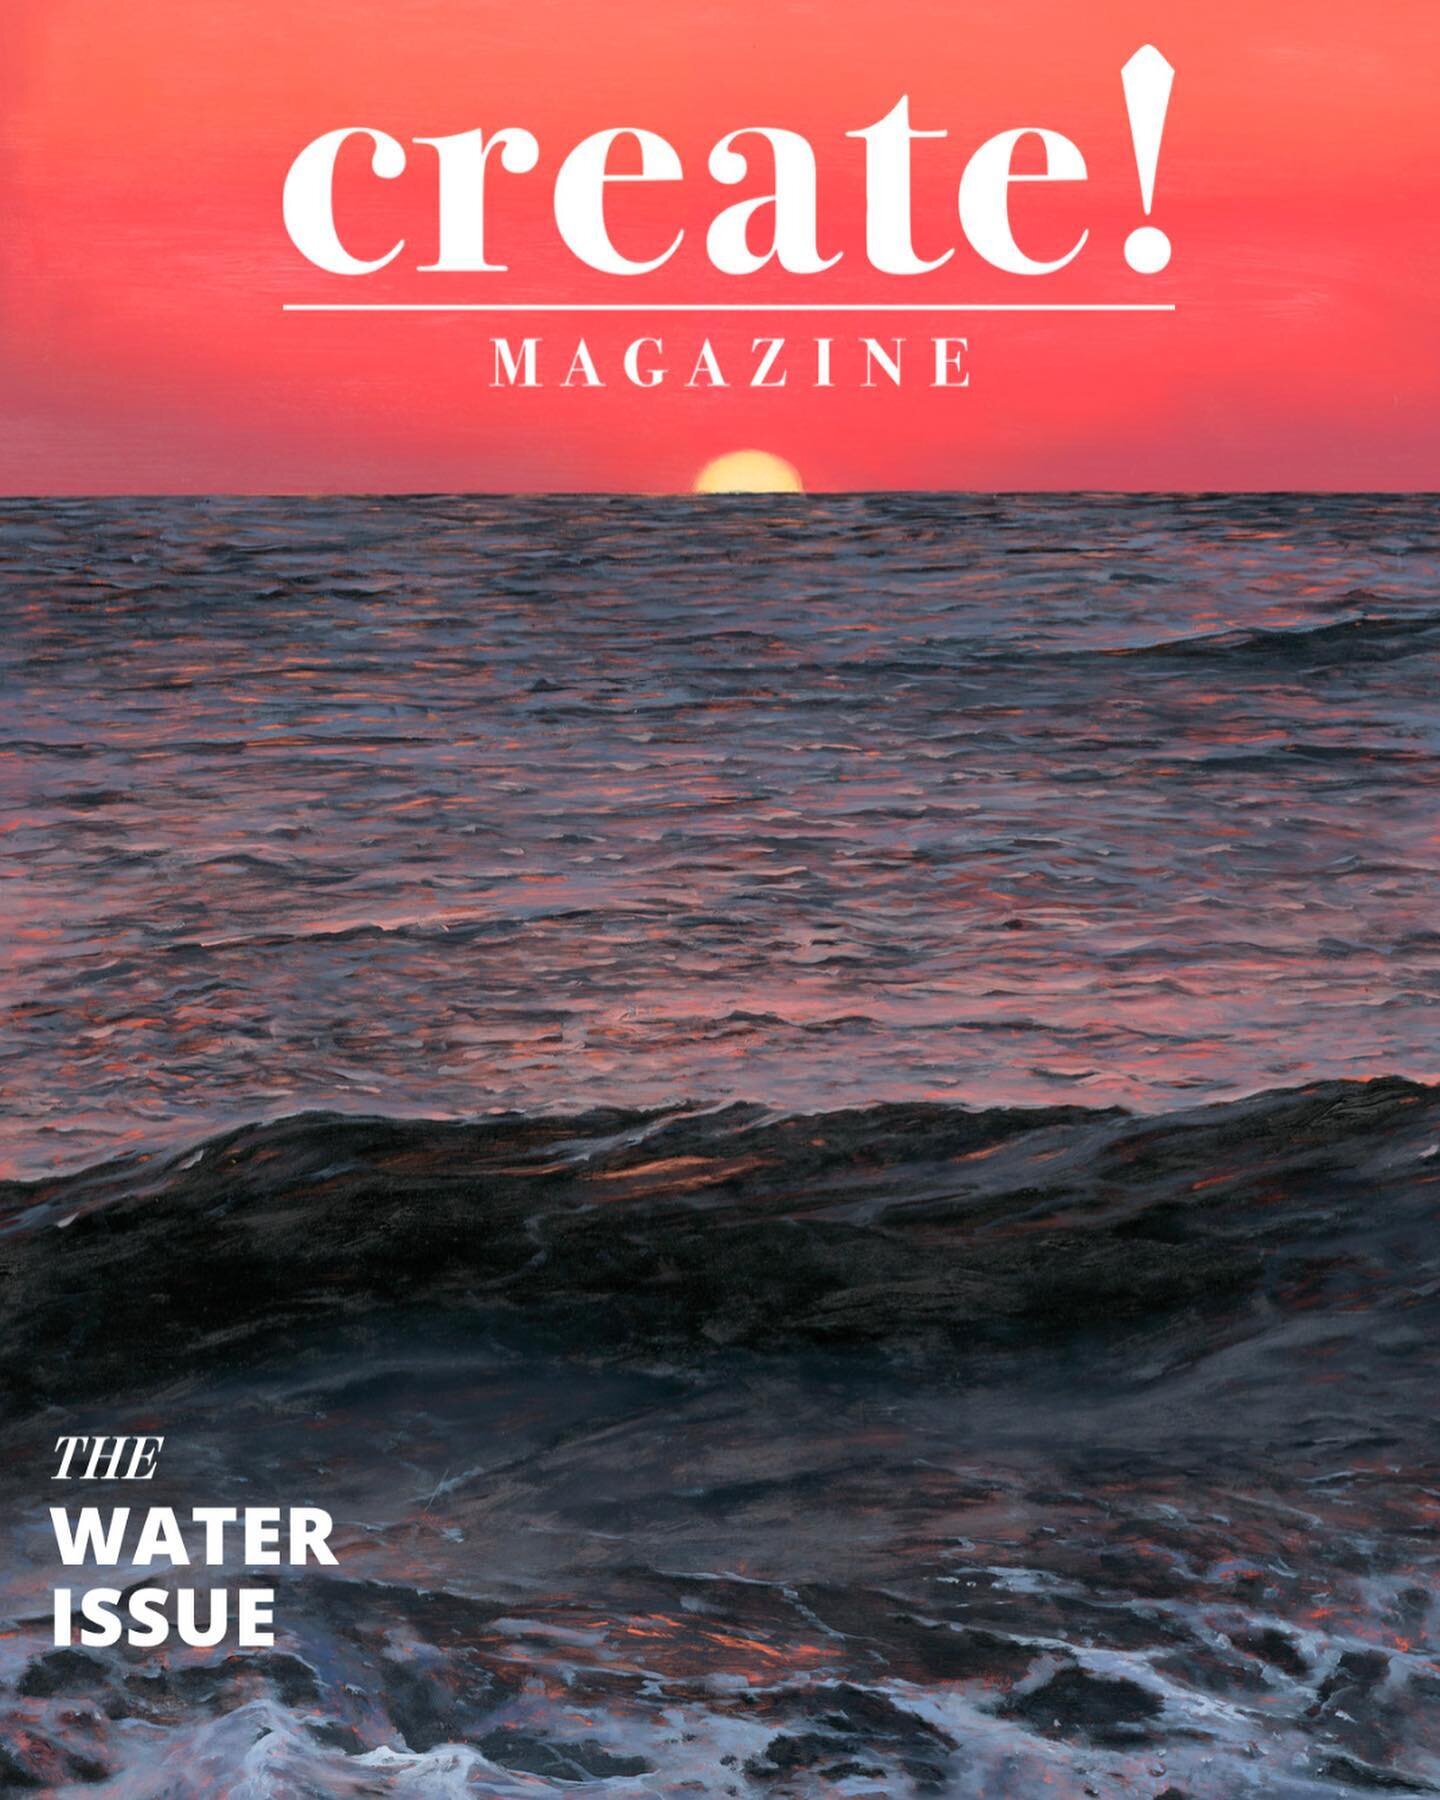 Honored to make the cover of issue #39 of create! Magazine&rsquo;s &ldquo;Water Issue&rdquo; this month. You can now order a copy online through their website or Amazon. @createmagazine 👉🏻Swipe to read some of my interview. #artistinterview #create